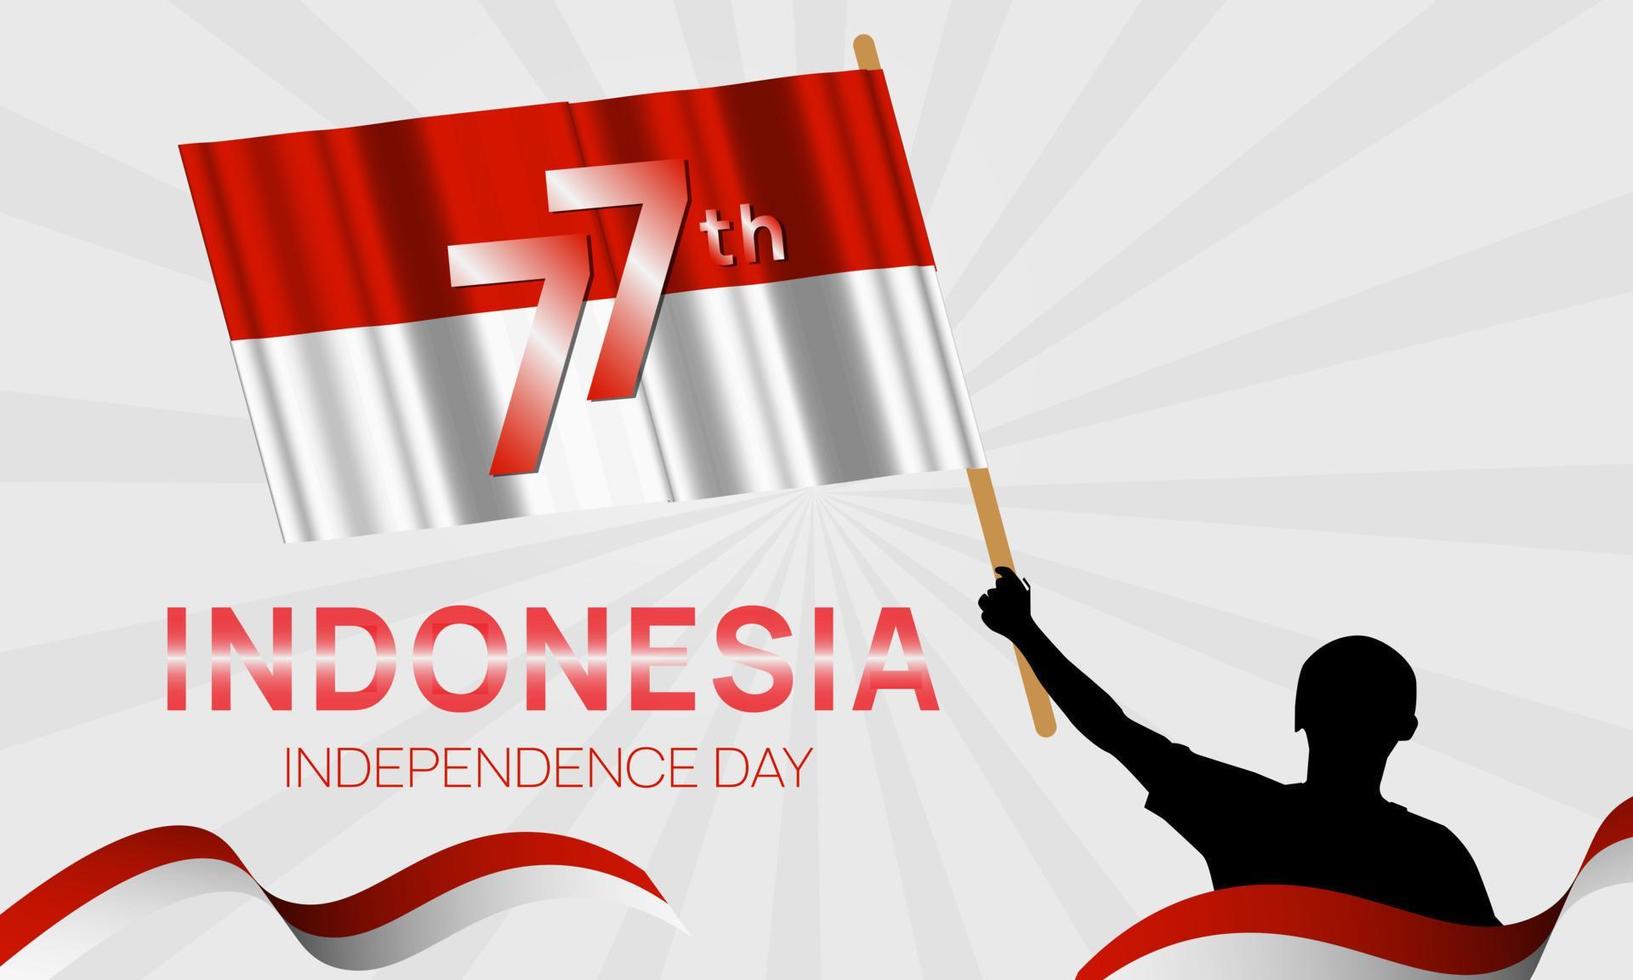 indonesian independence day 17 august 77 years indonesian independence background vector